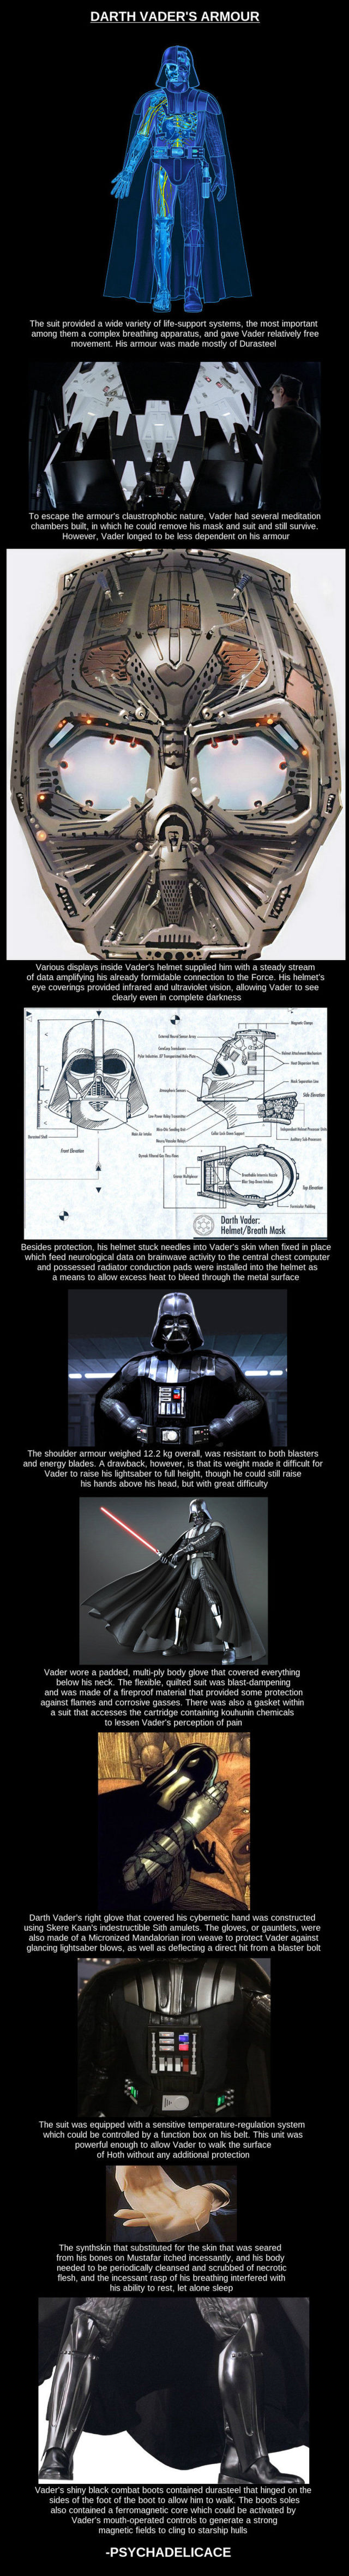 Everything You Wanted To Know About Darth Vaders Amour